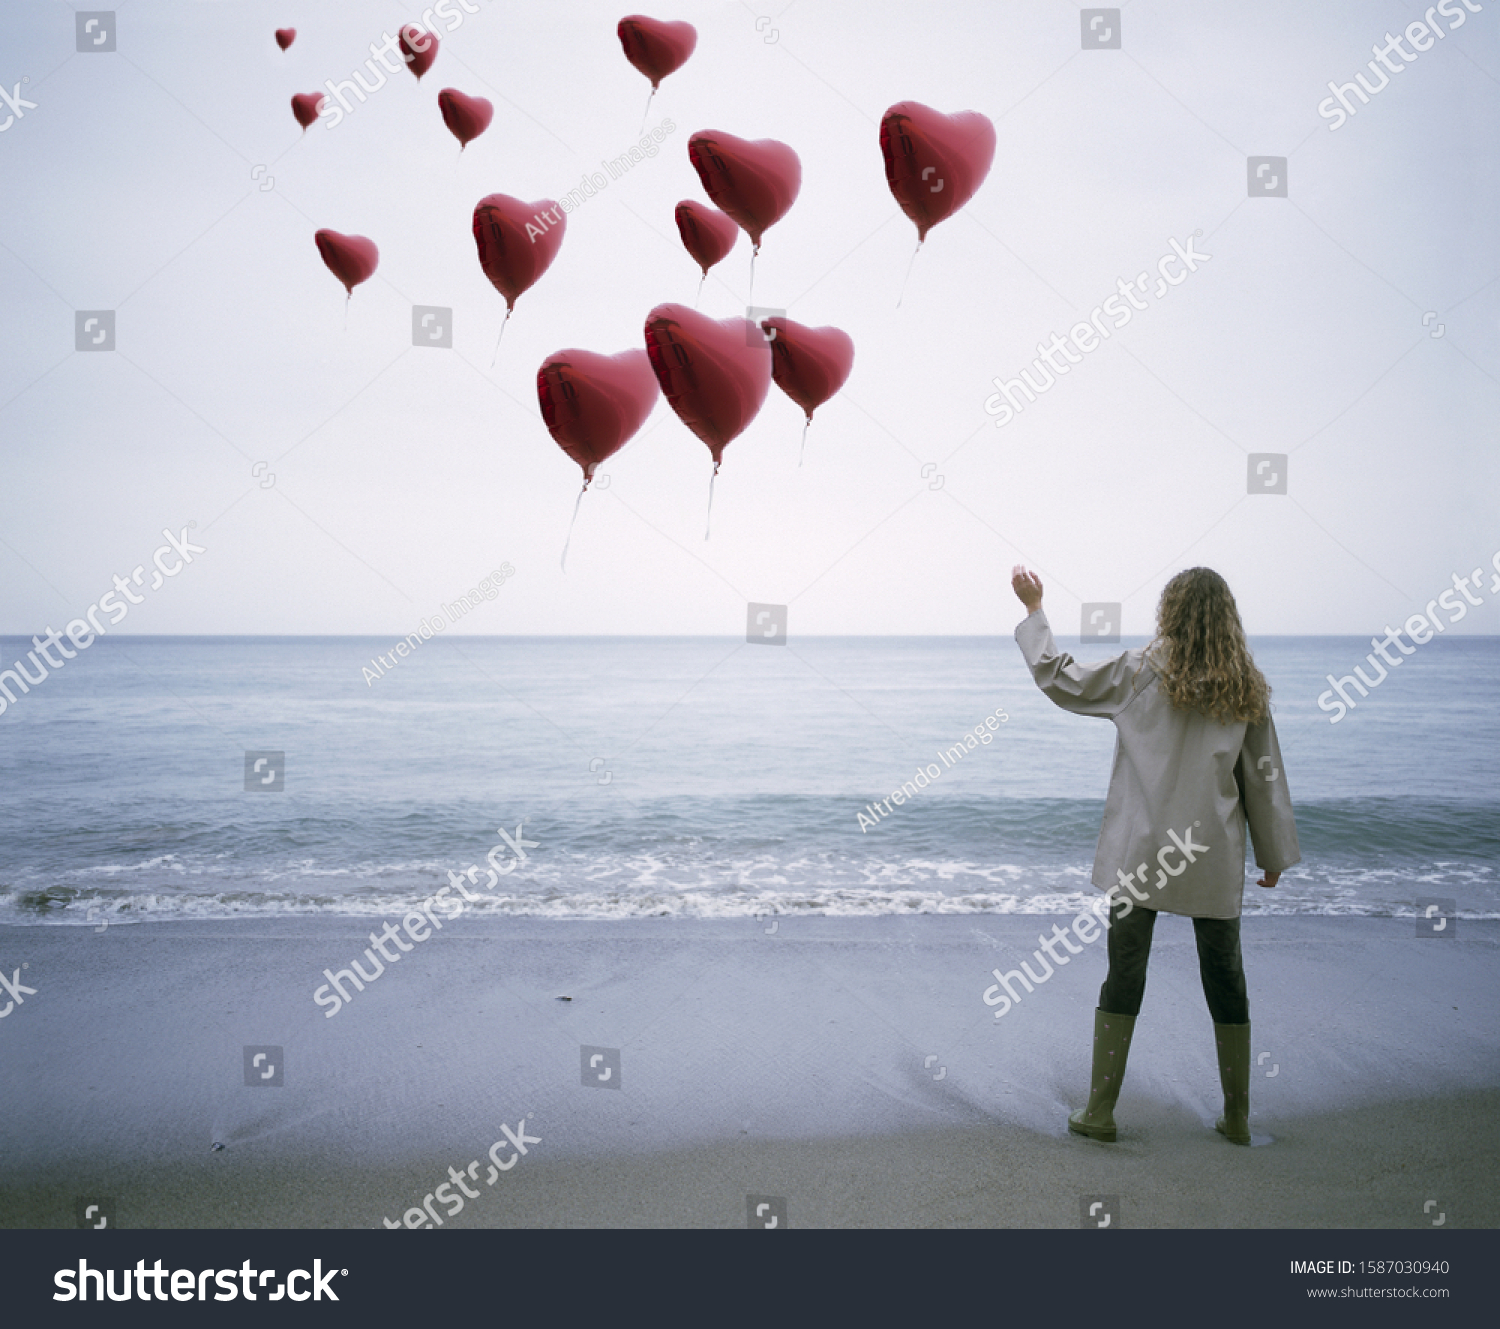 View of a woman letting heart-shaped balloons go on the beach #1587030940